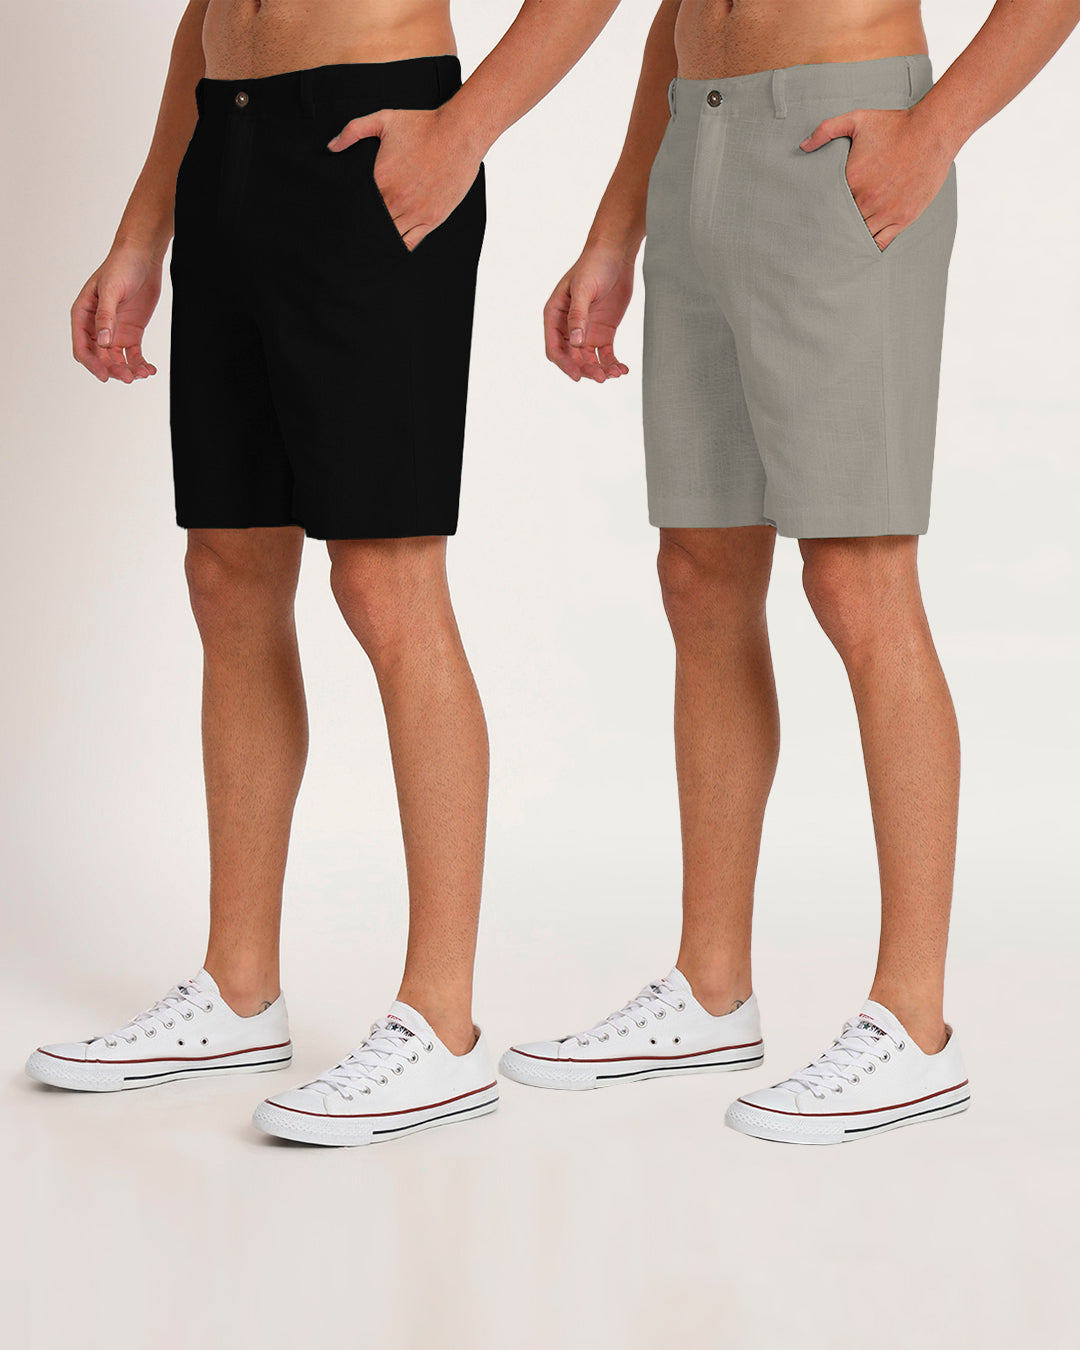 Combo : Ready For Anything Black & Grey Men's Shorts